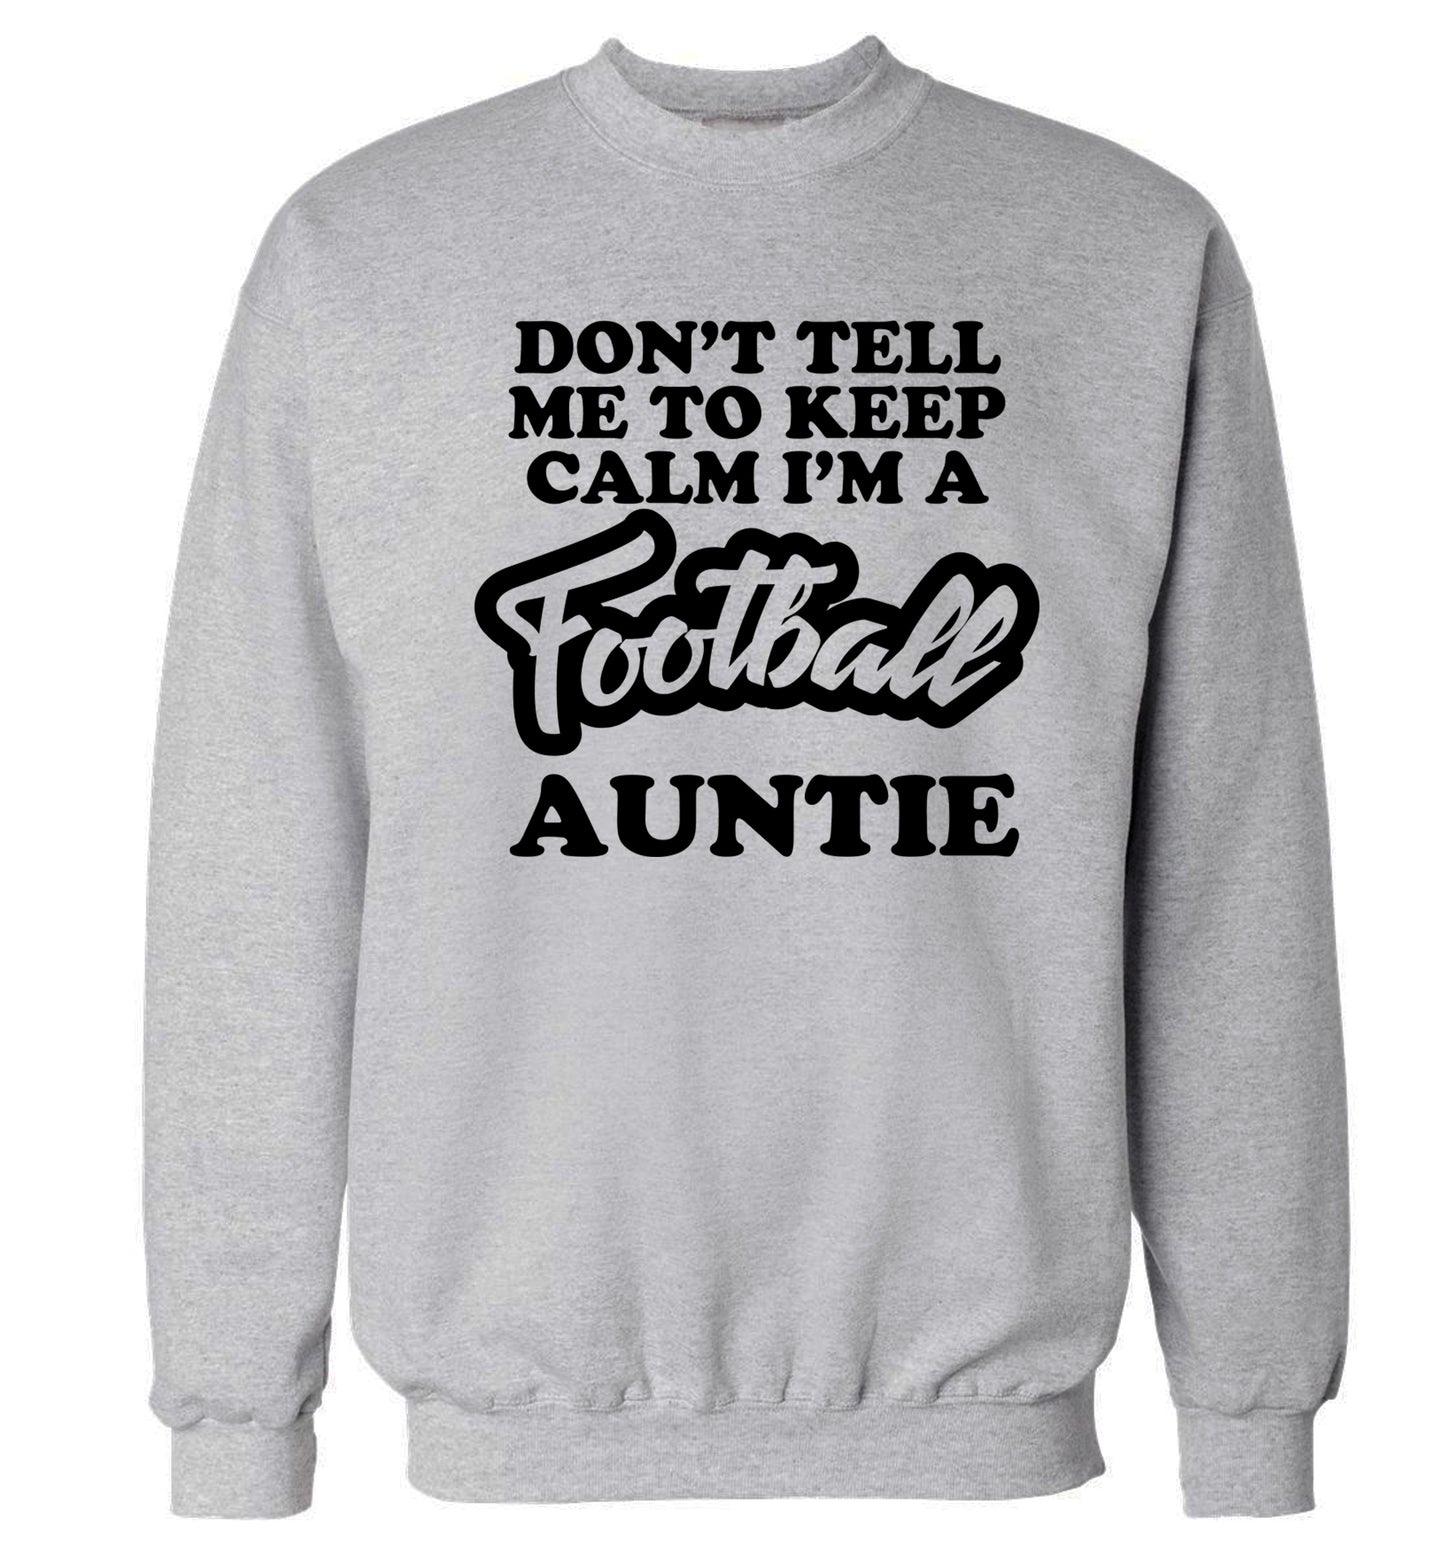 Don't tell me to keep calm I'm a football auntie Adult's unisexgrey Sweater 2XL